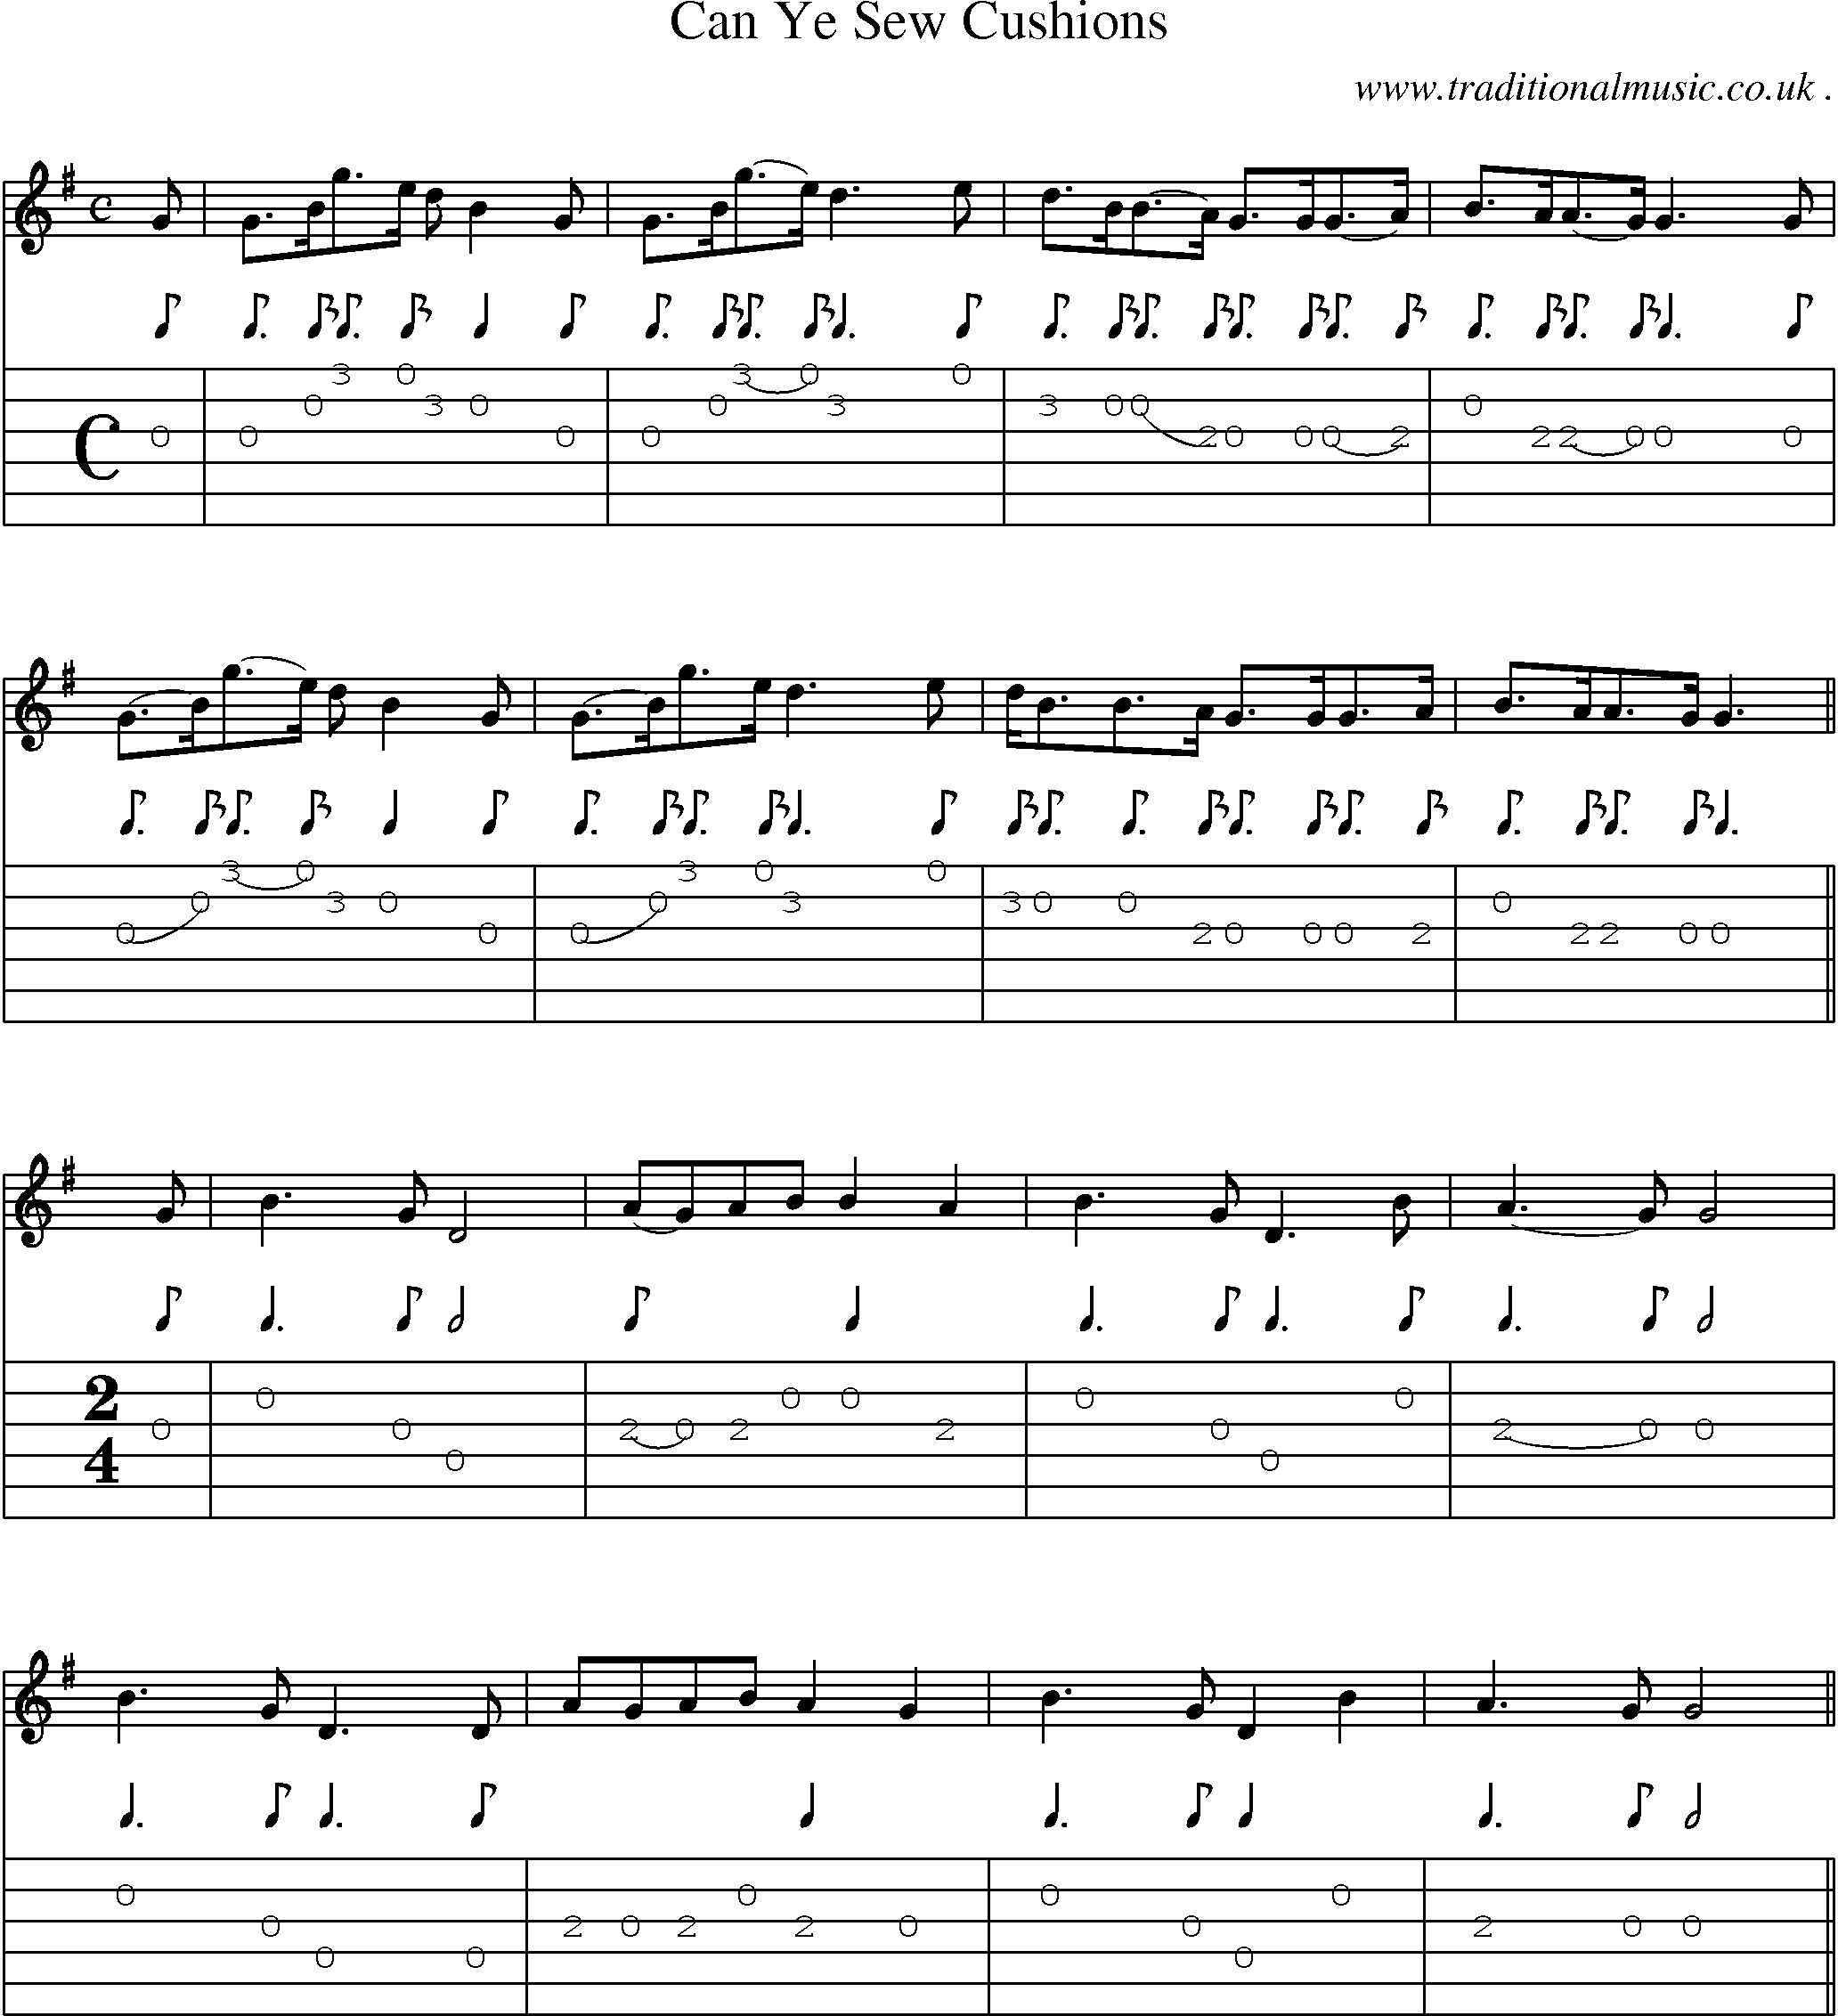 Sheet-Music and Guitar Tabs for Can Ye Sew Cushions